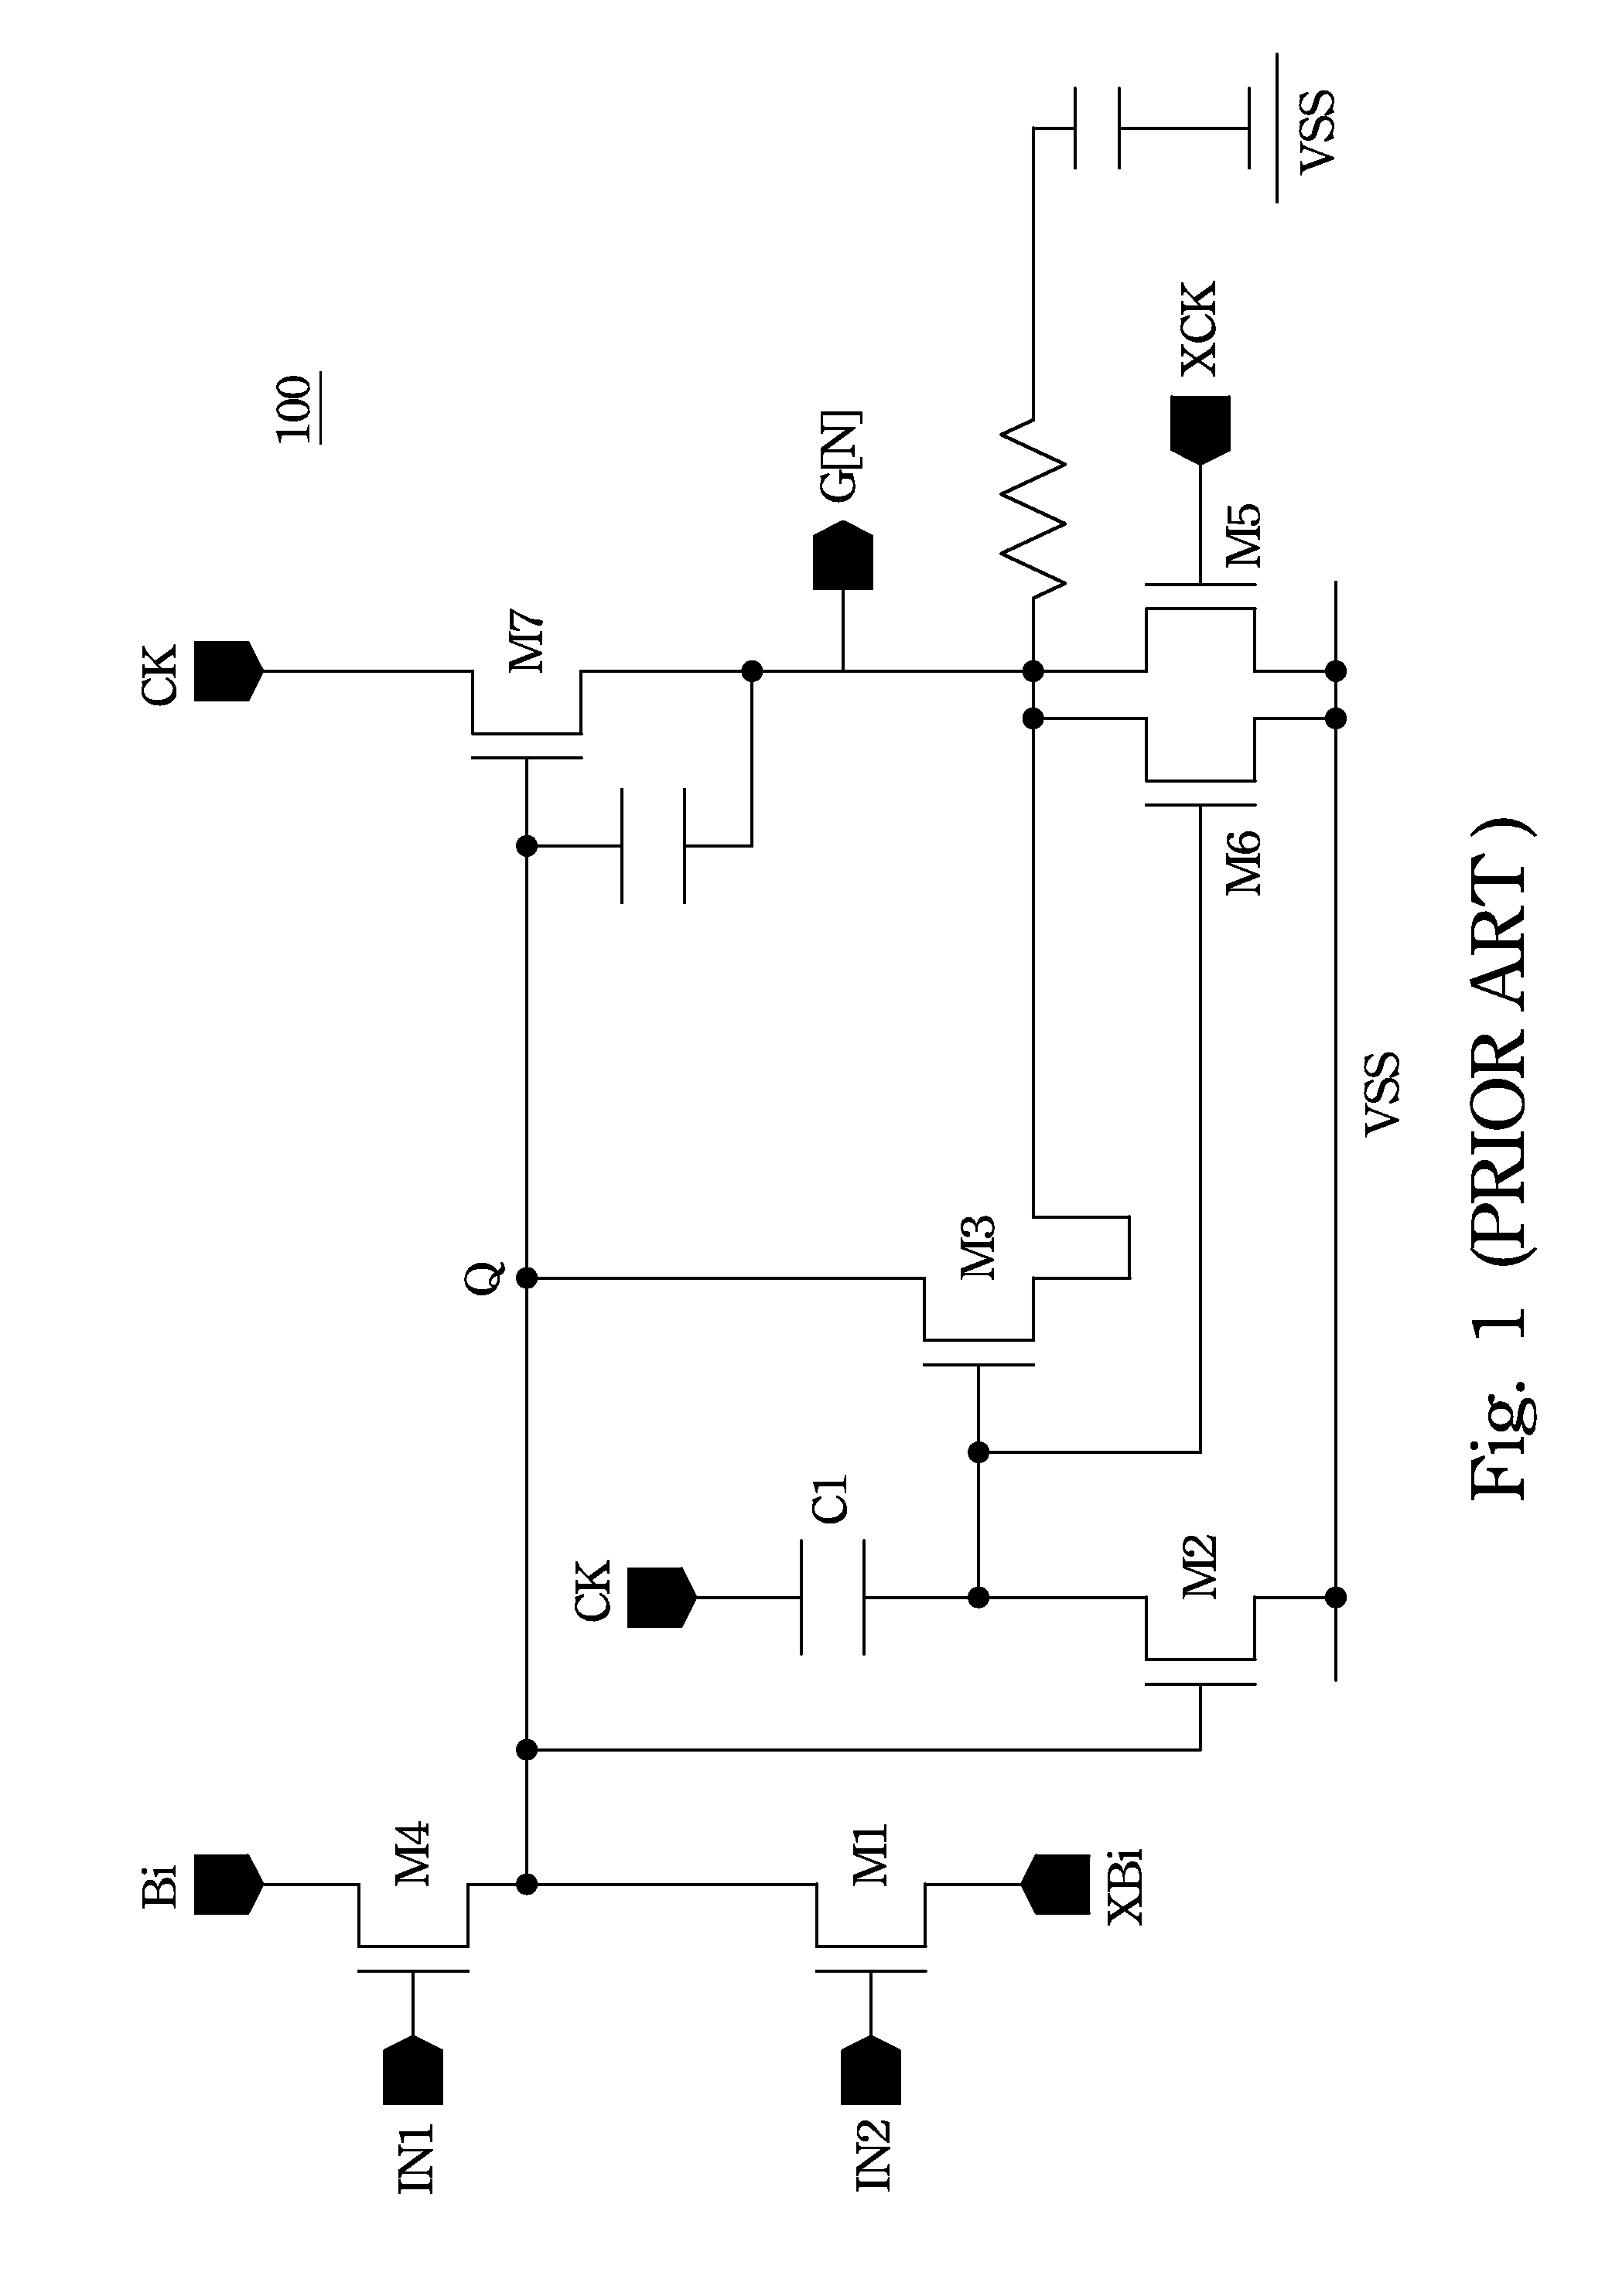 Display panel and gate driver therein